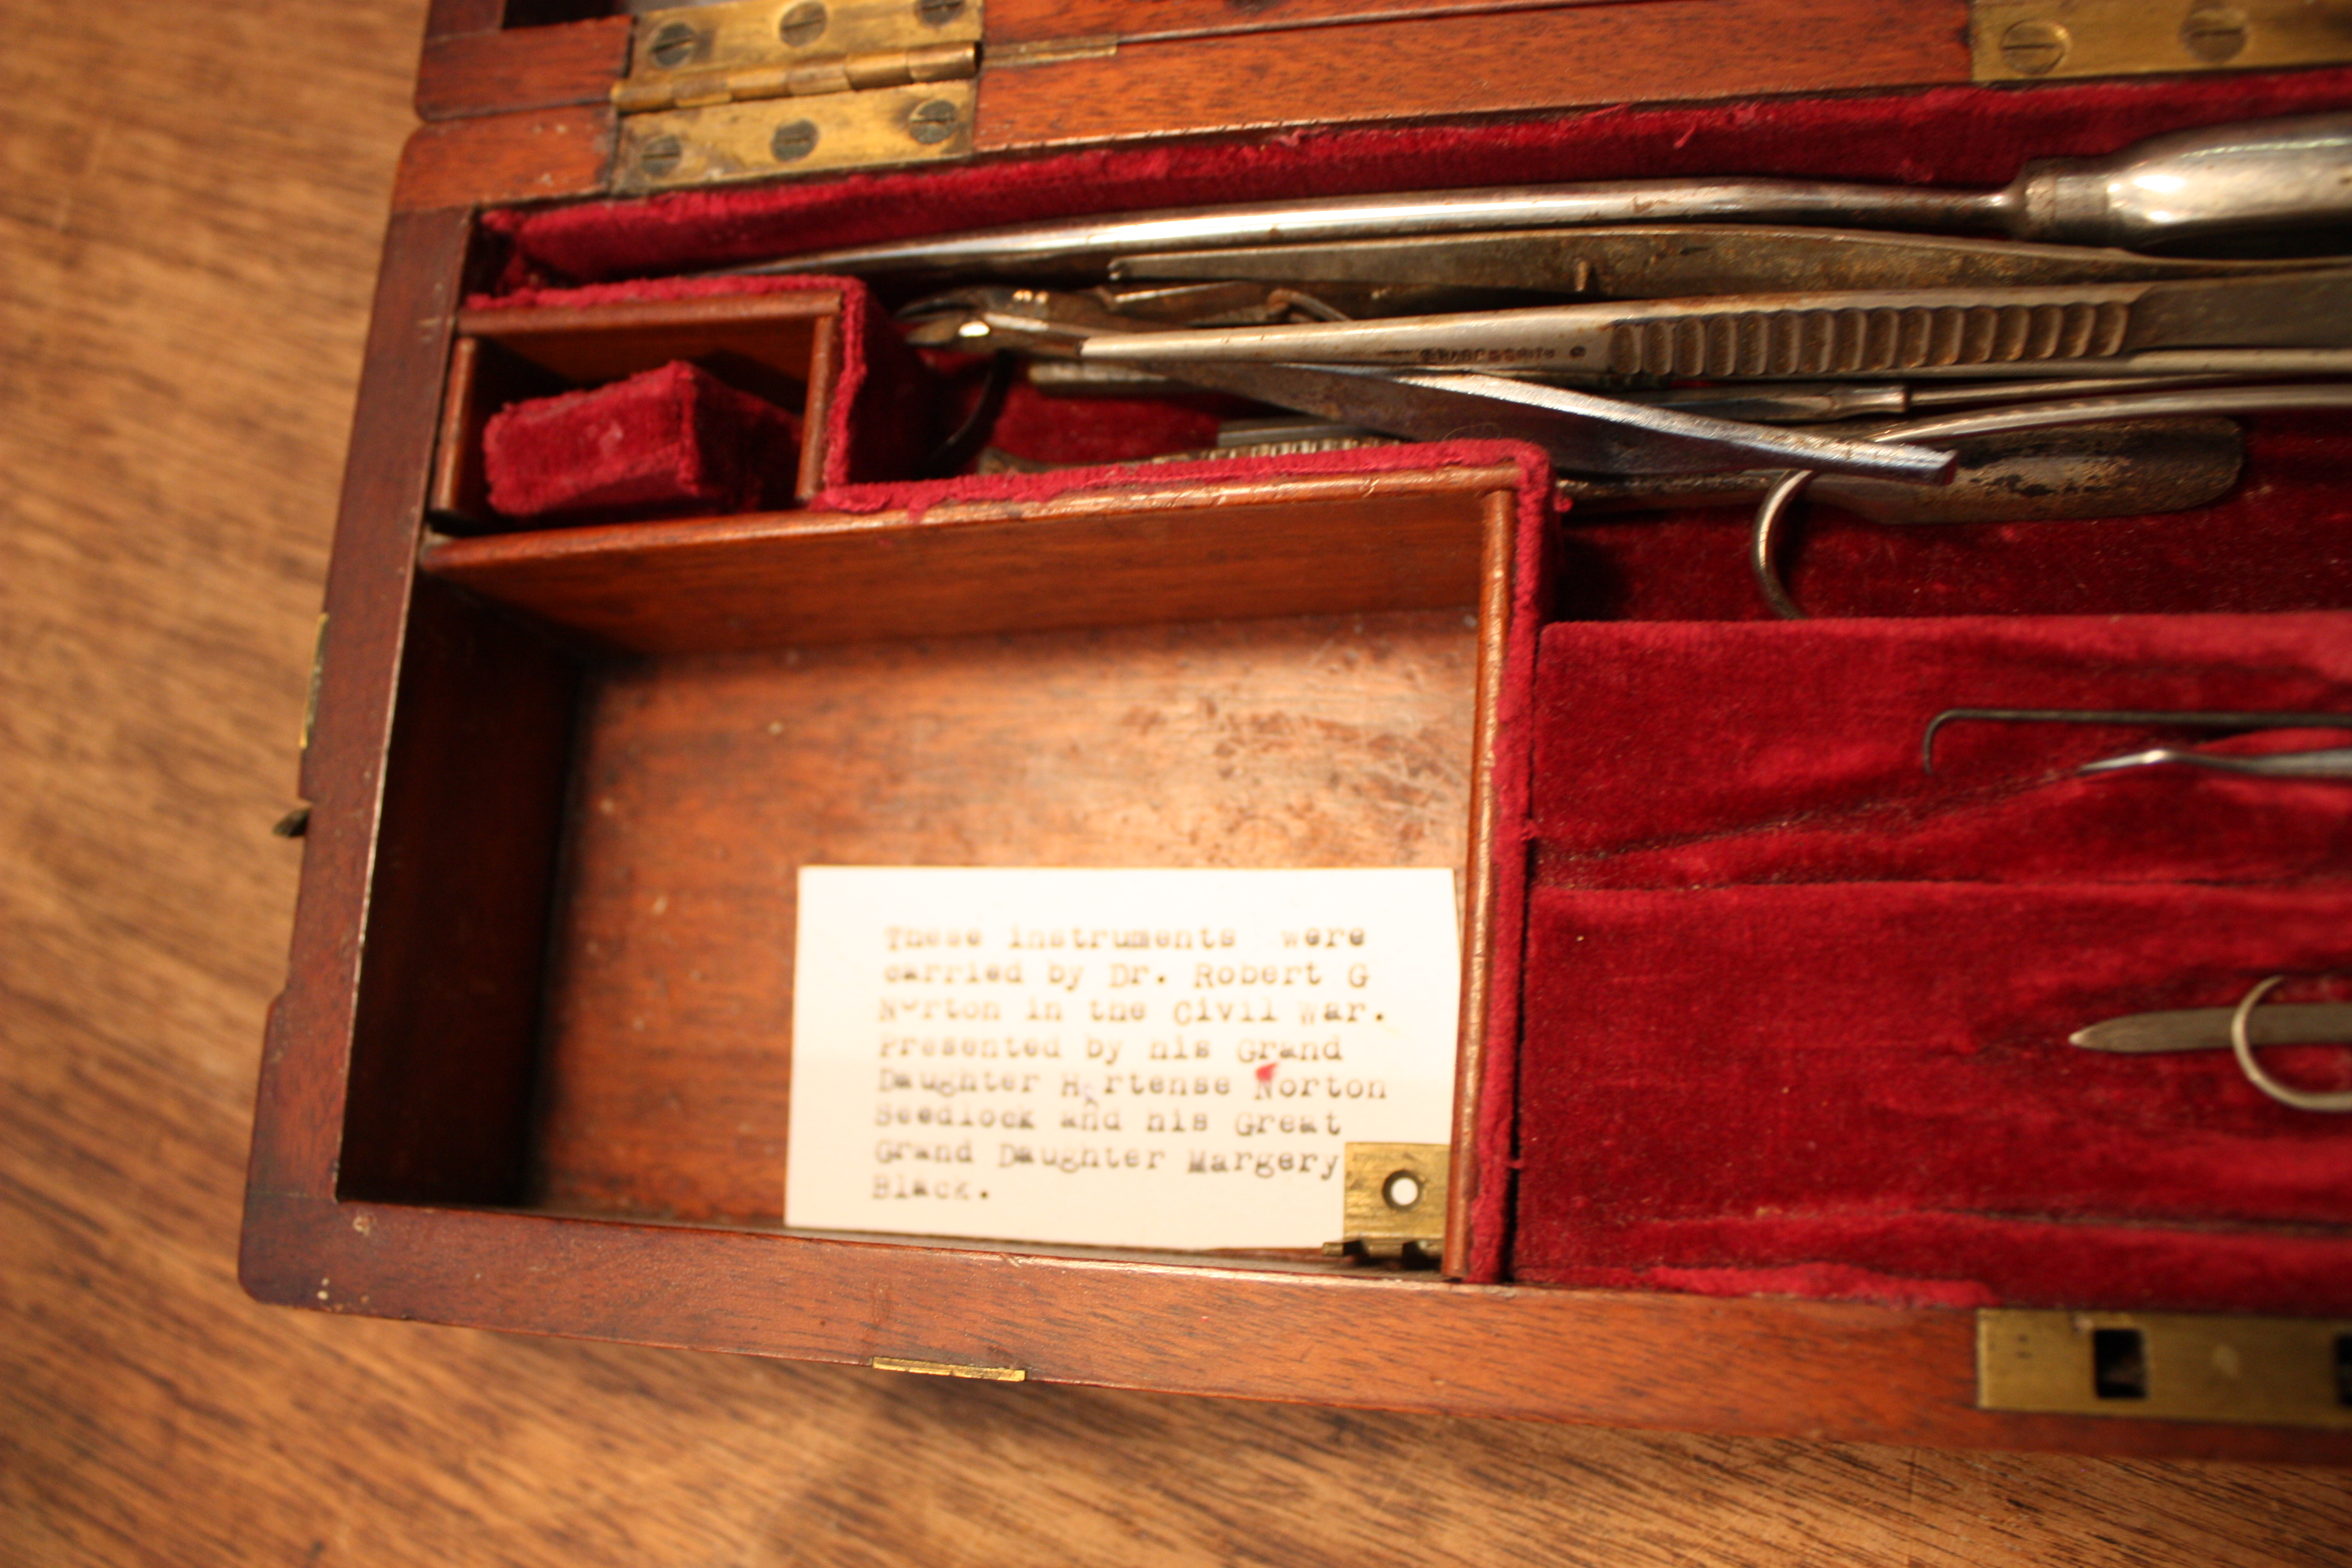 Surgical Tools used by Dr. Robert Goldfrey Norton during the Civil War.